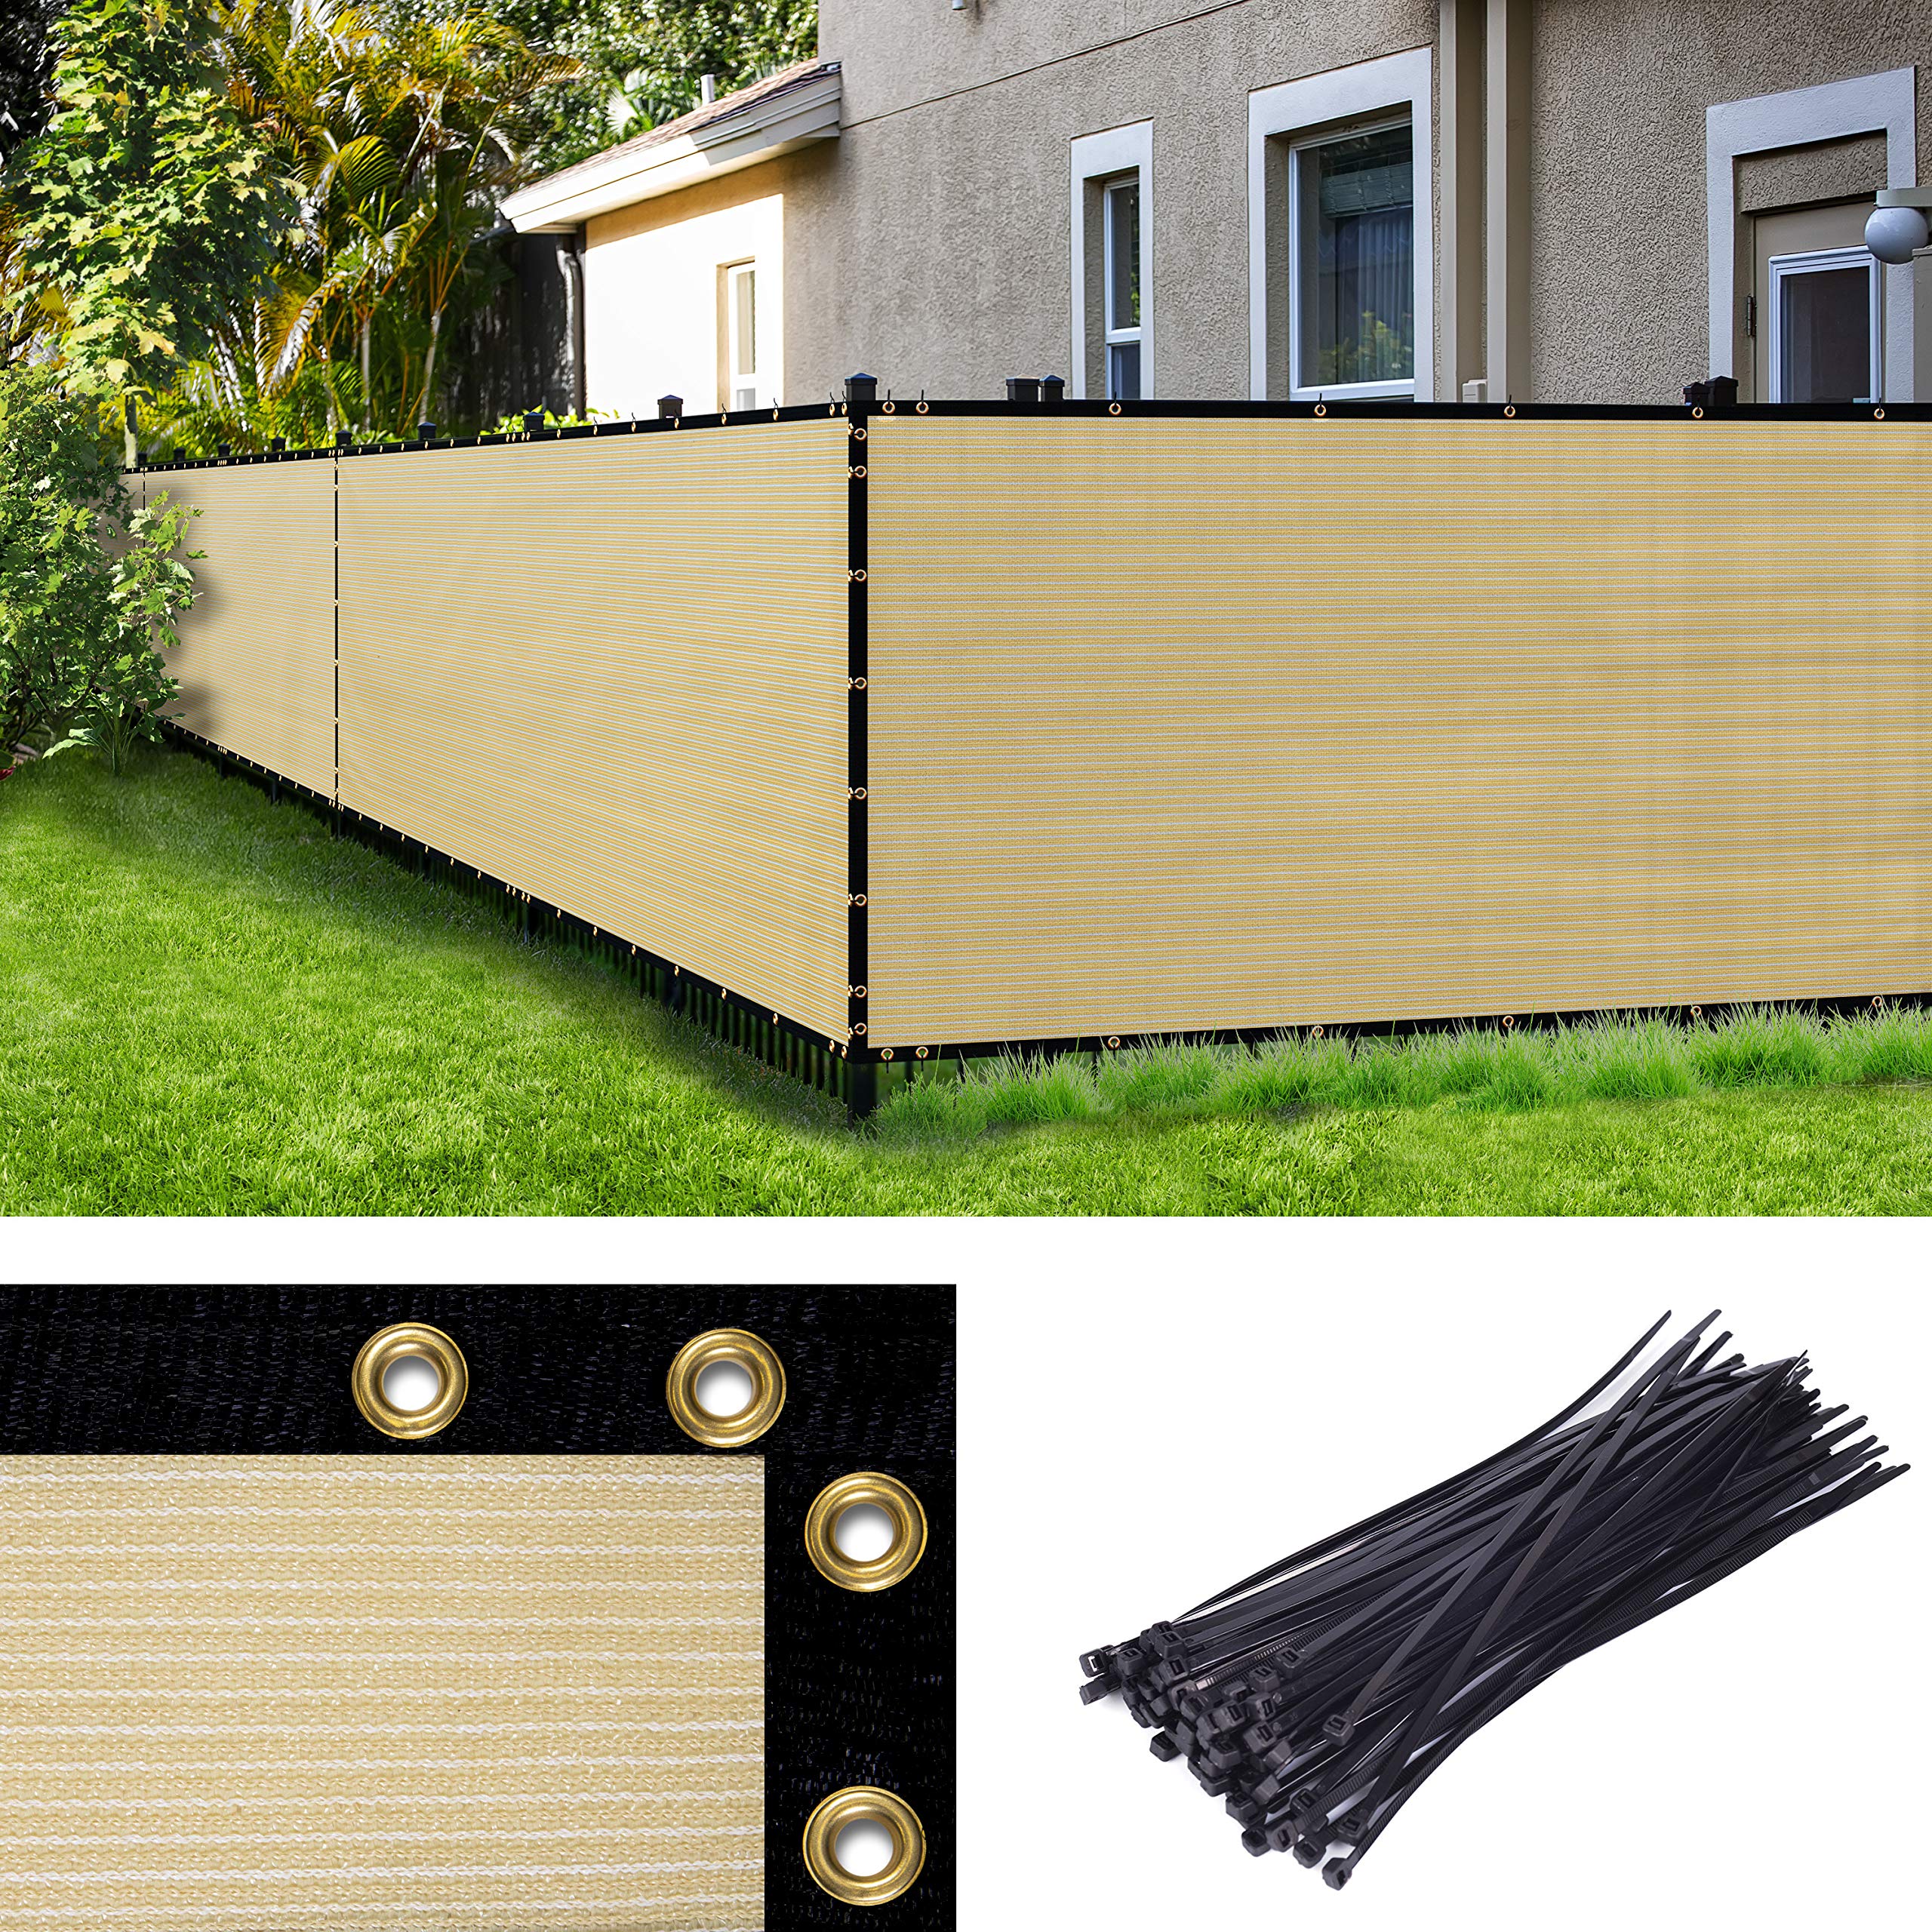 Amgo custom Made 6 x 37 custom Size Beige Fence Privacy Screen Windscreen,with Bindings & grommets Heavy Duty for commer